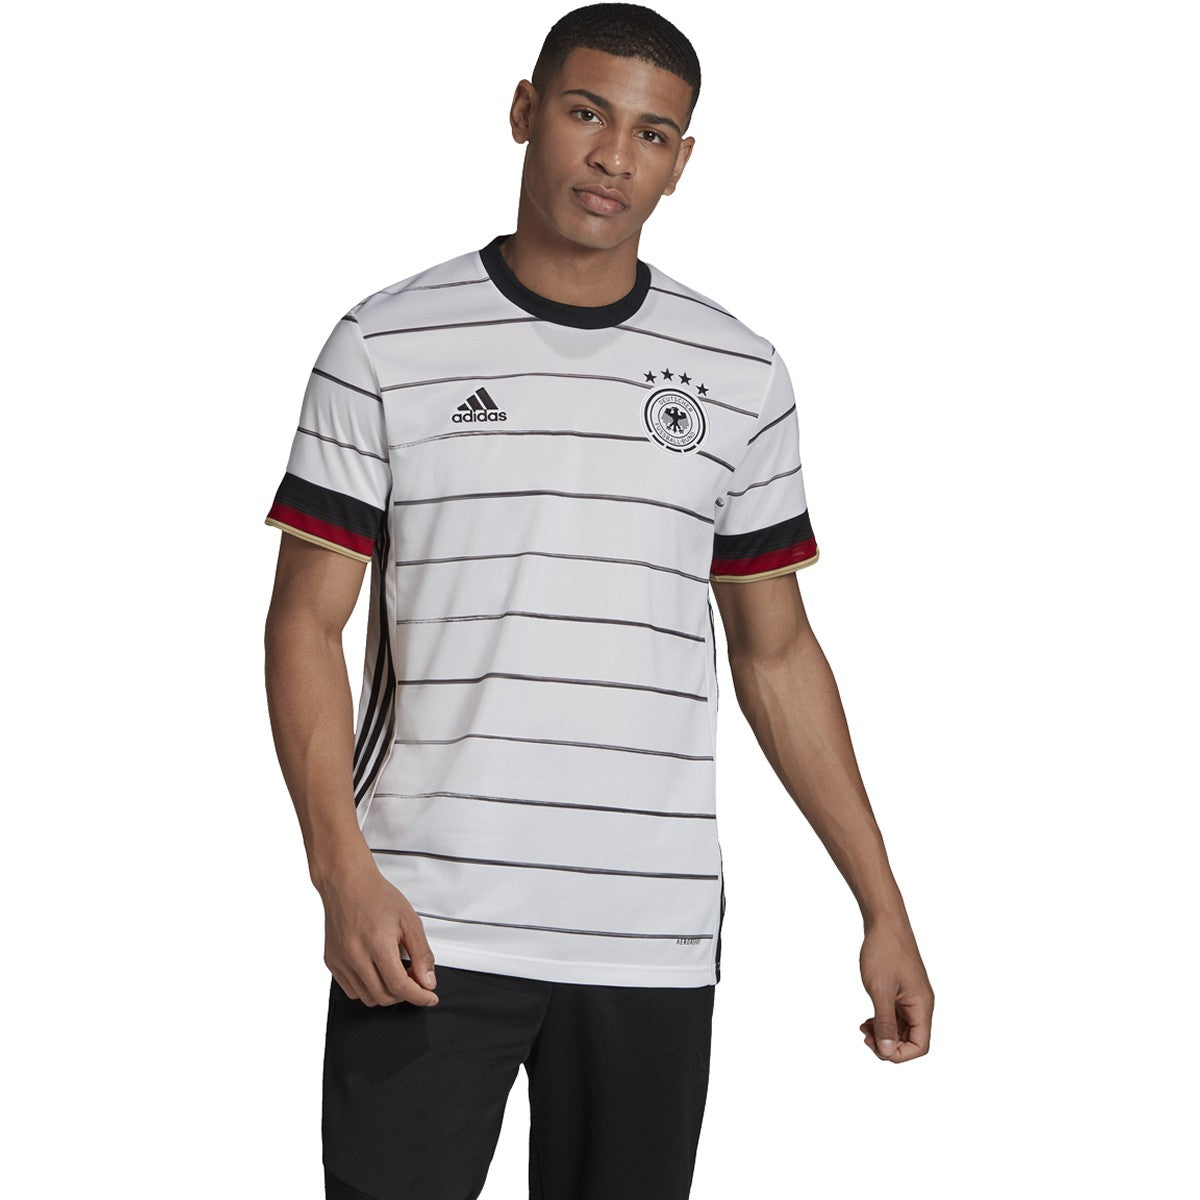 Adidas Germany Home Jersey - White/Black, S